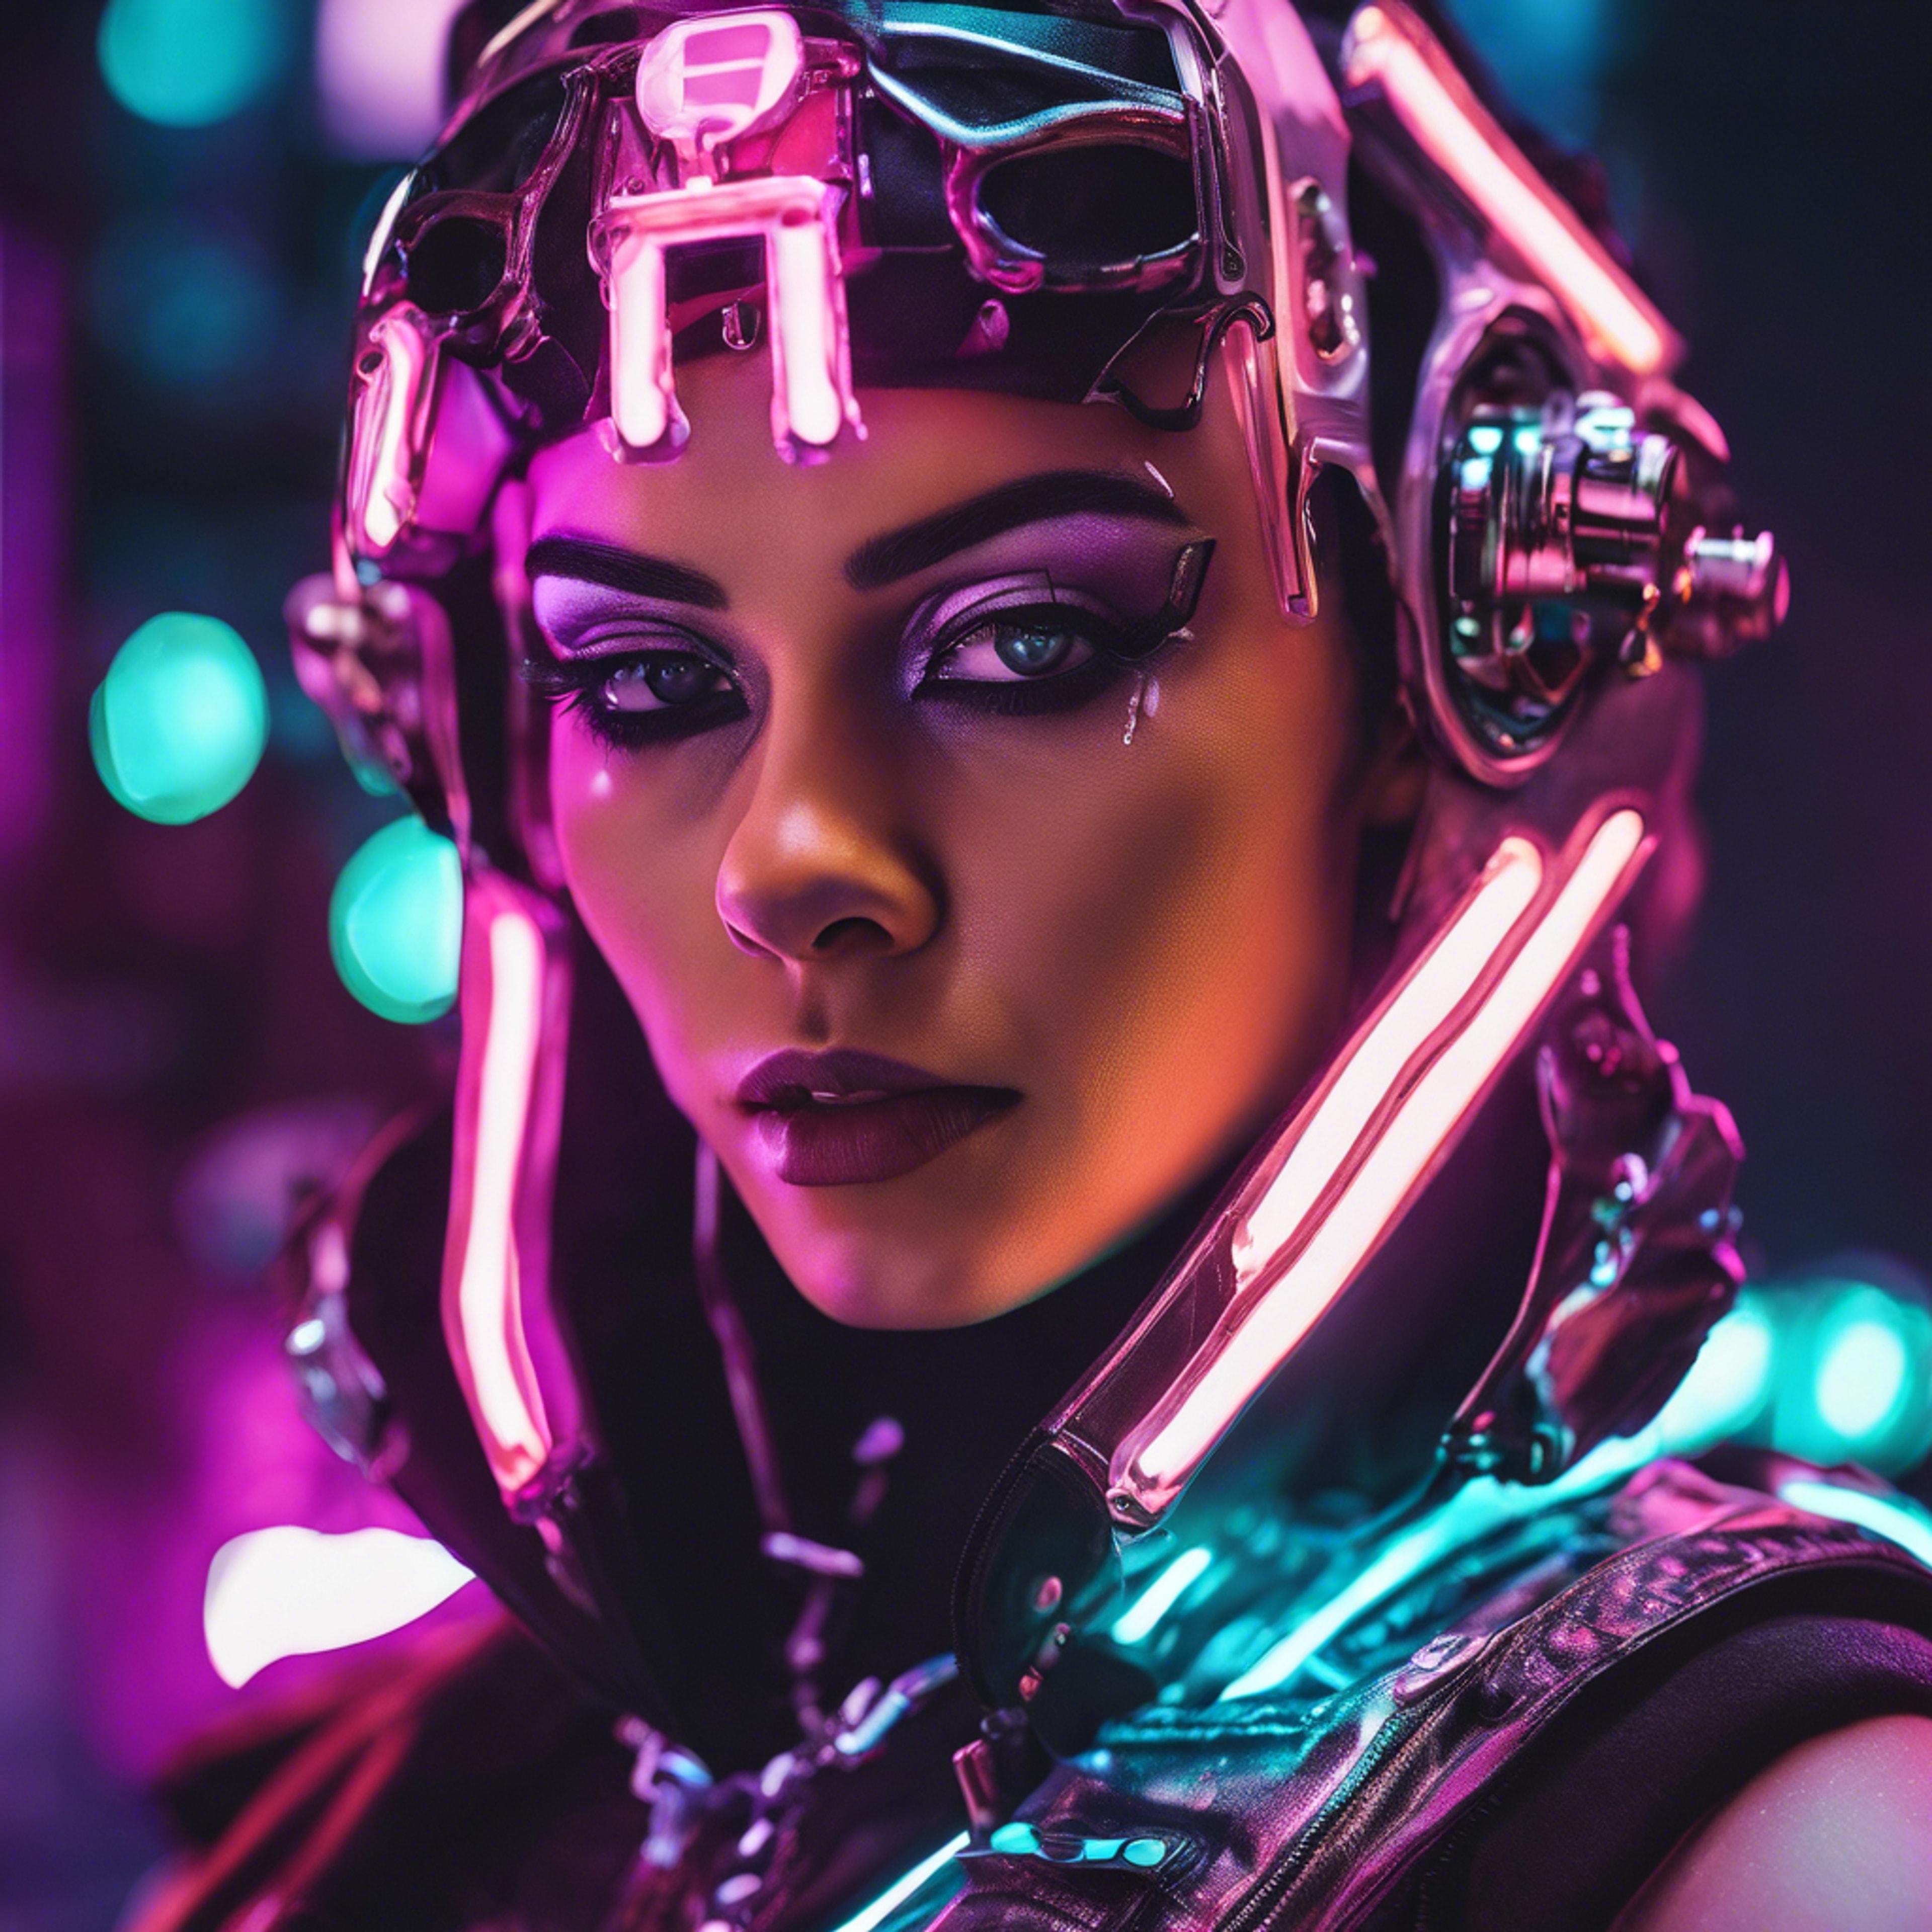 A close-up portrait of a cyberpunk baddie in neon lighting, metal piercings, and sci-fi-inspired makeup. Валлпапер[9ac0123c92044077bebc]